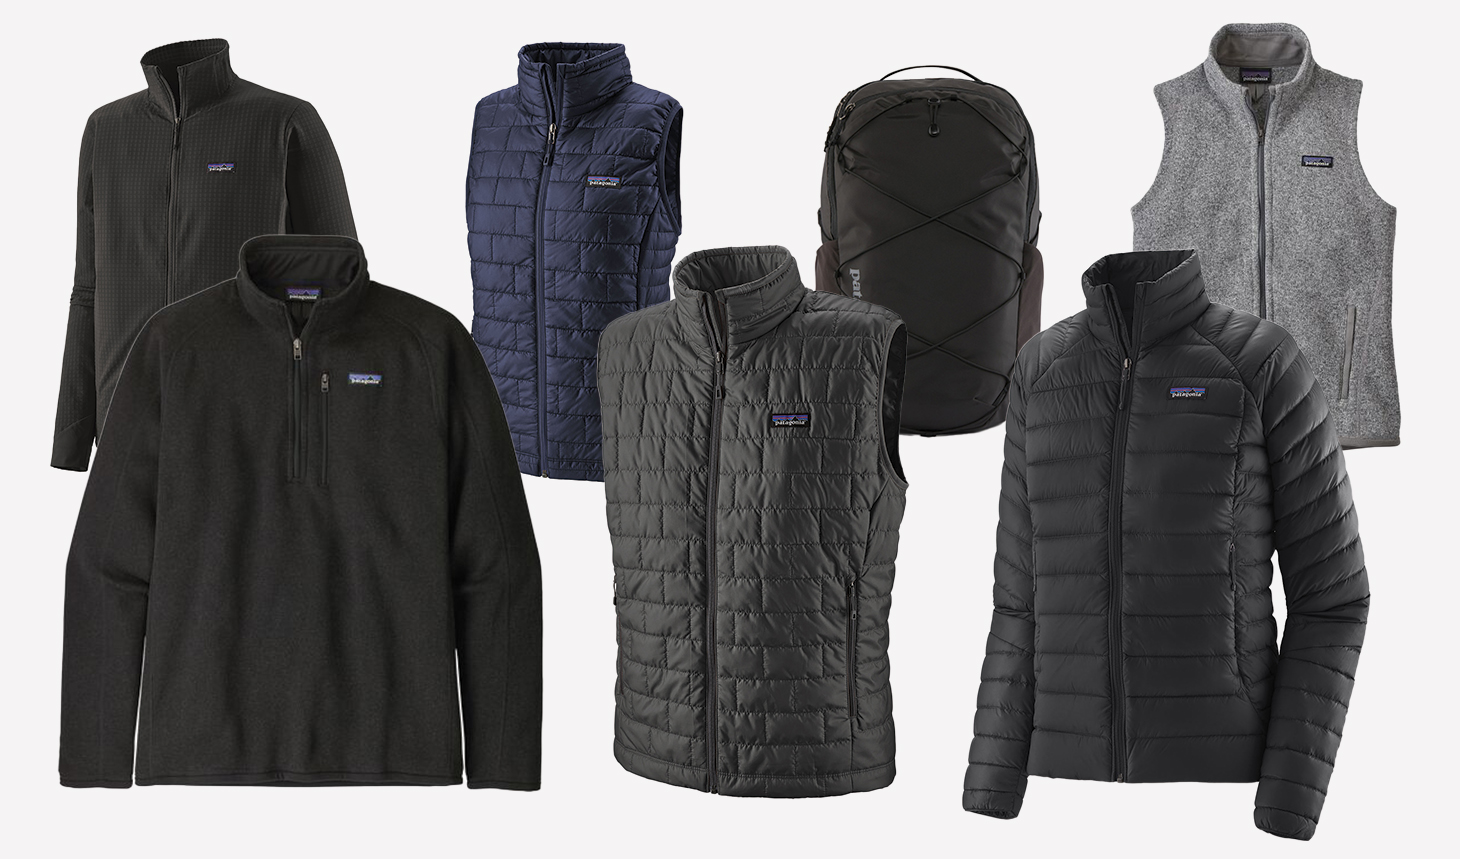 Patagonia jackets, sweaters, vest and a bag